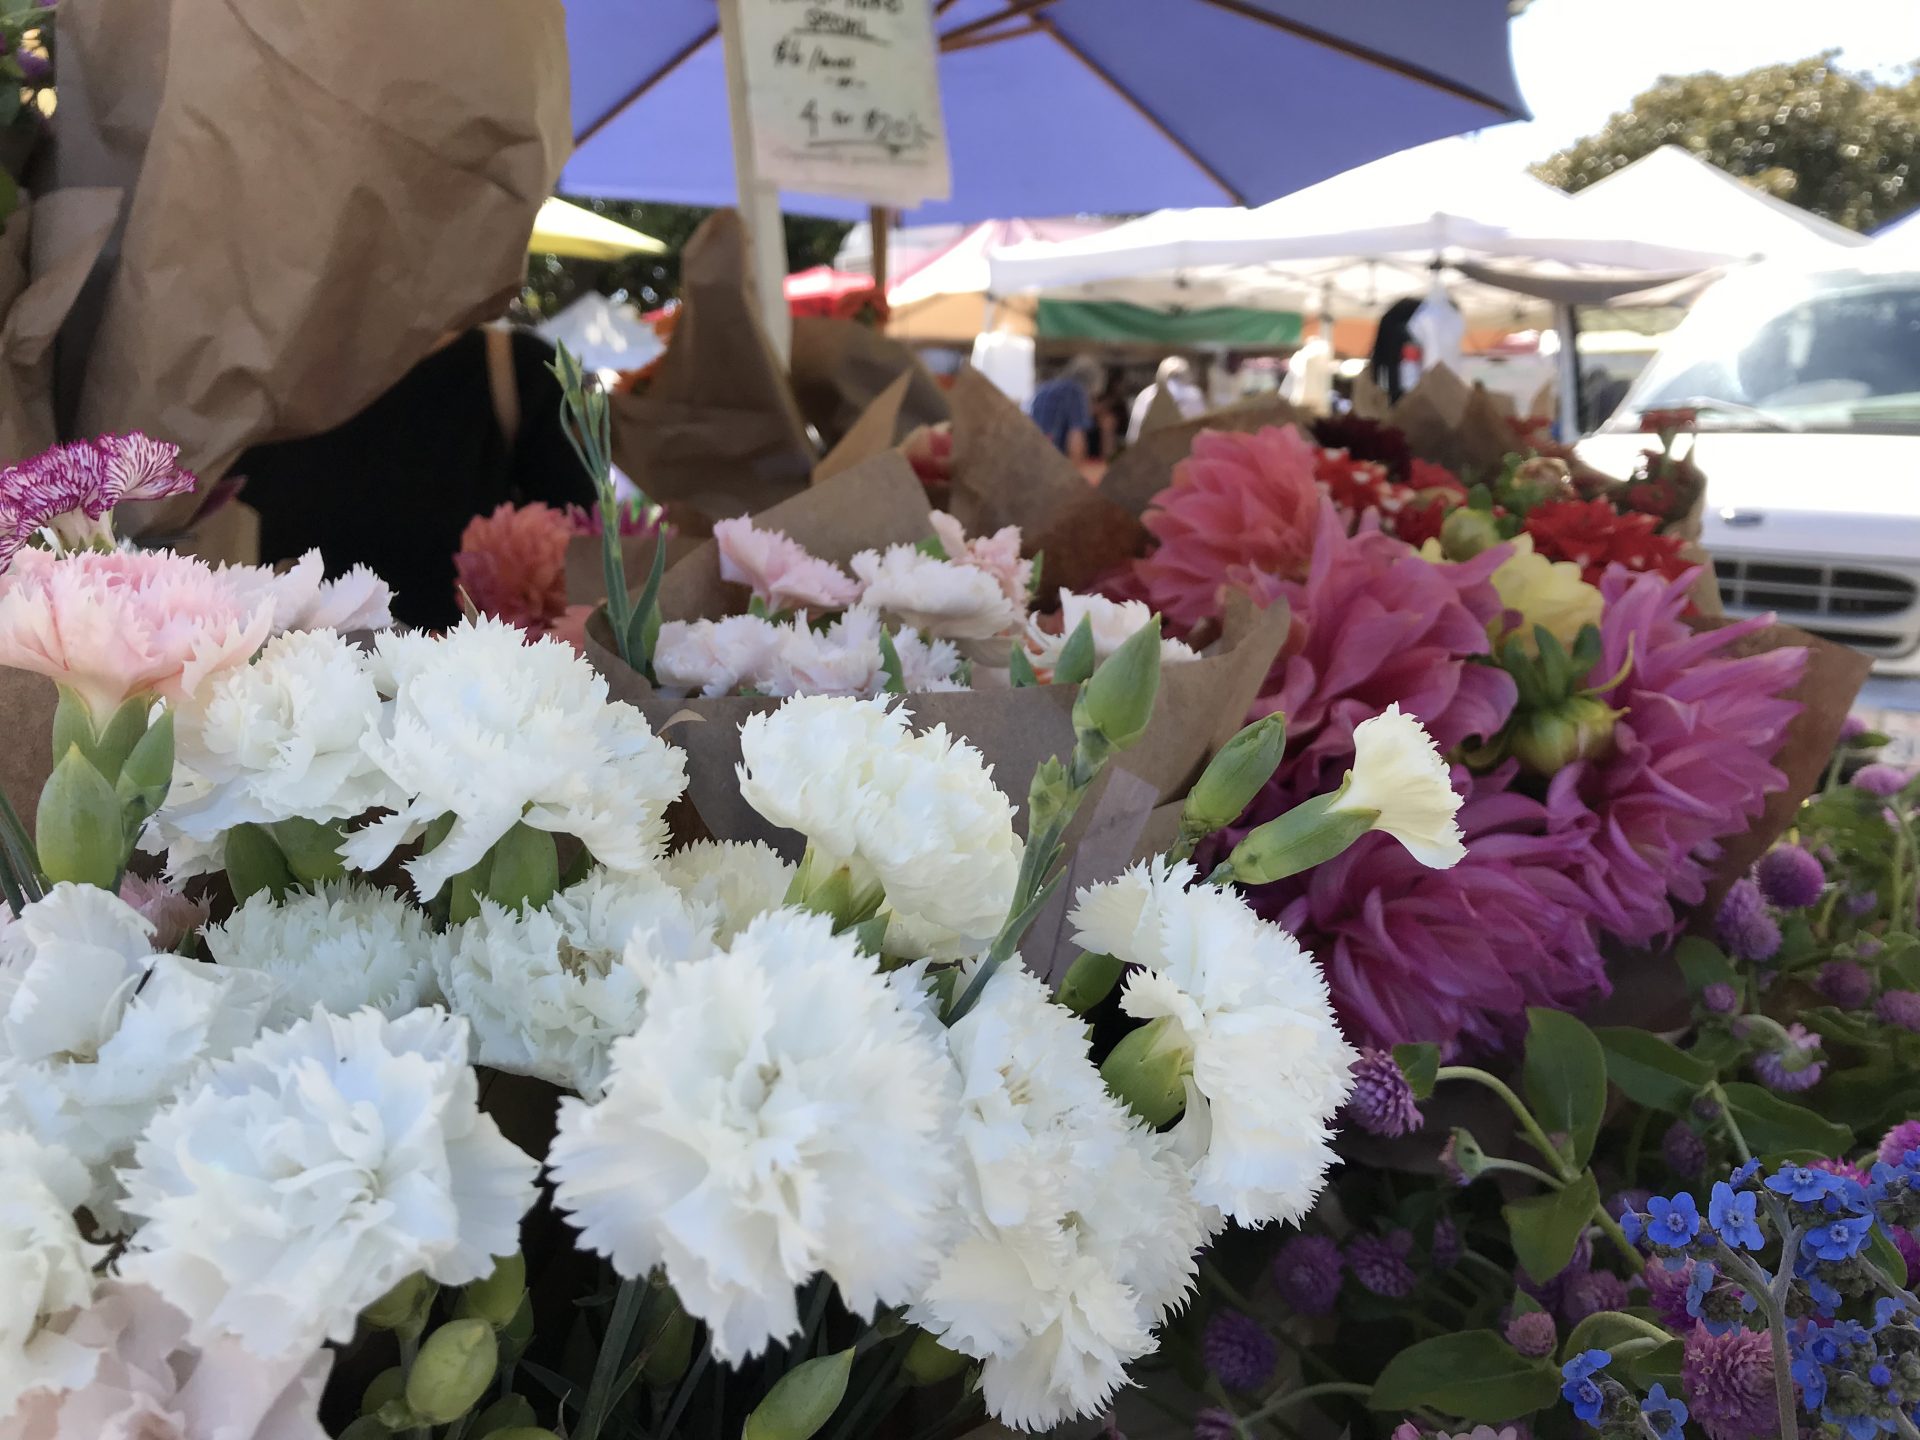 Scotts Valley Farmers Market to Open June 6th, 2020